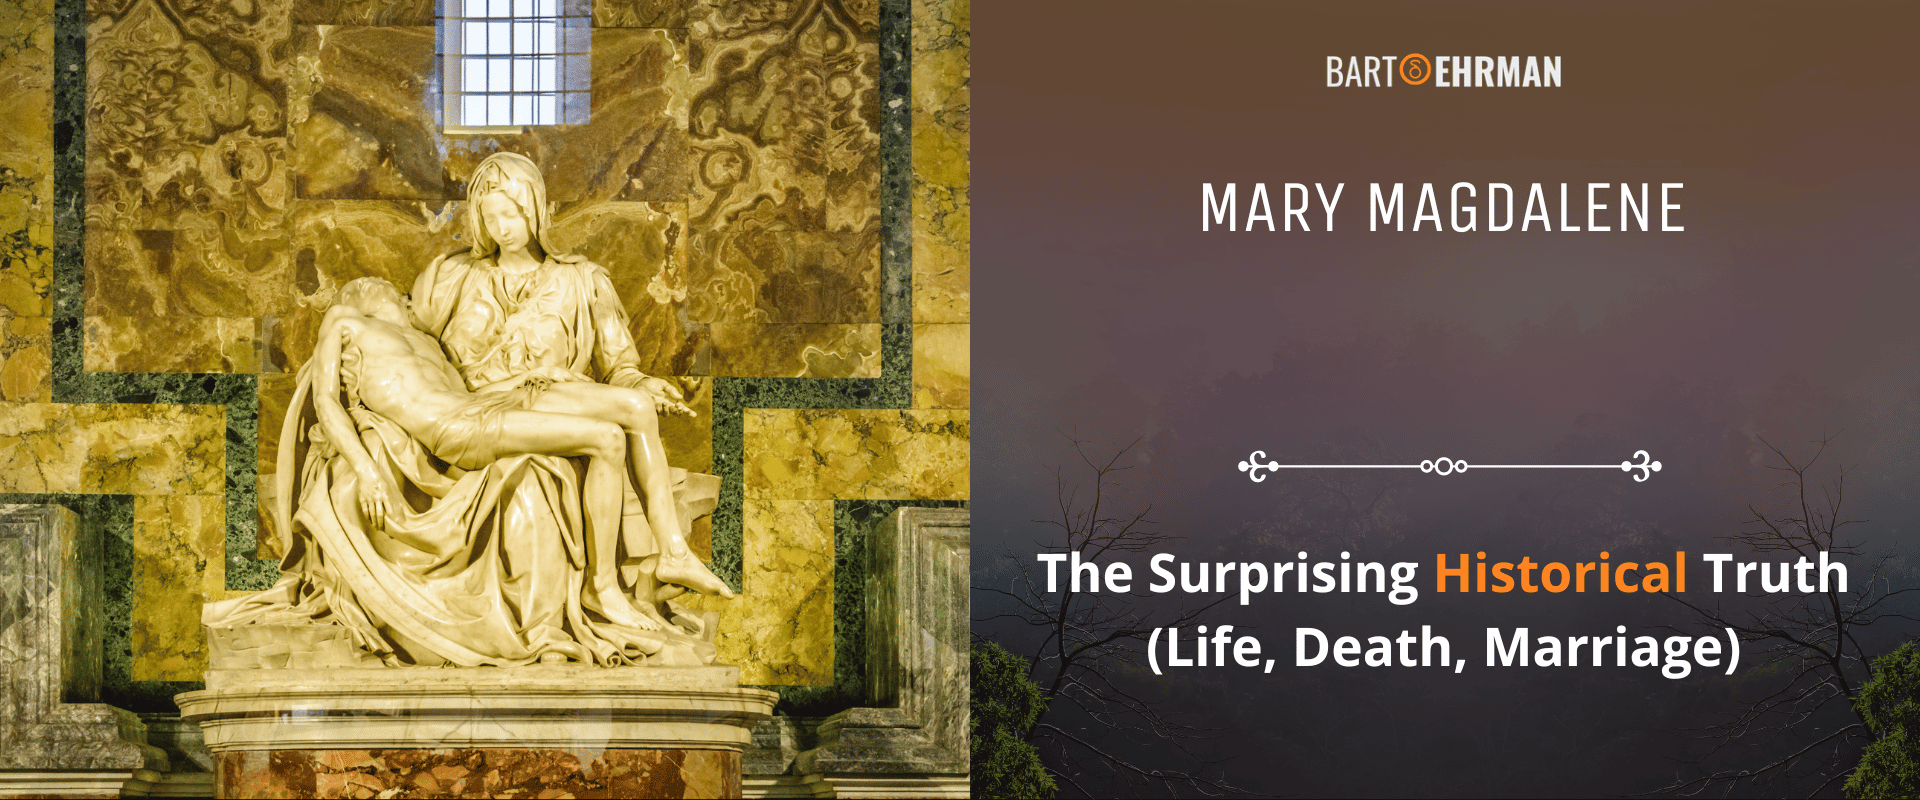 Mary Magdalene - The Surprising Historical Truth (Life, Death, Marriage)